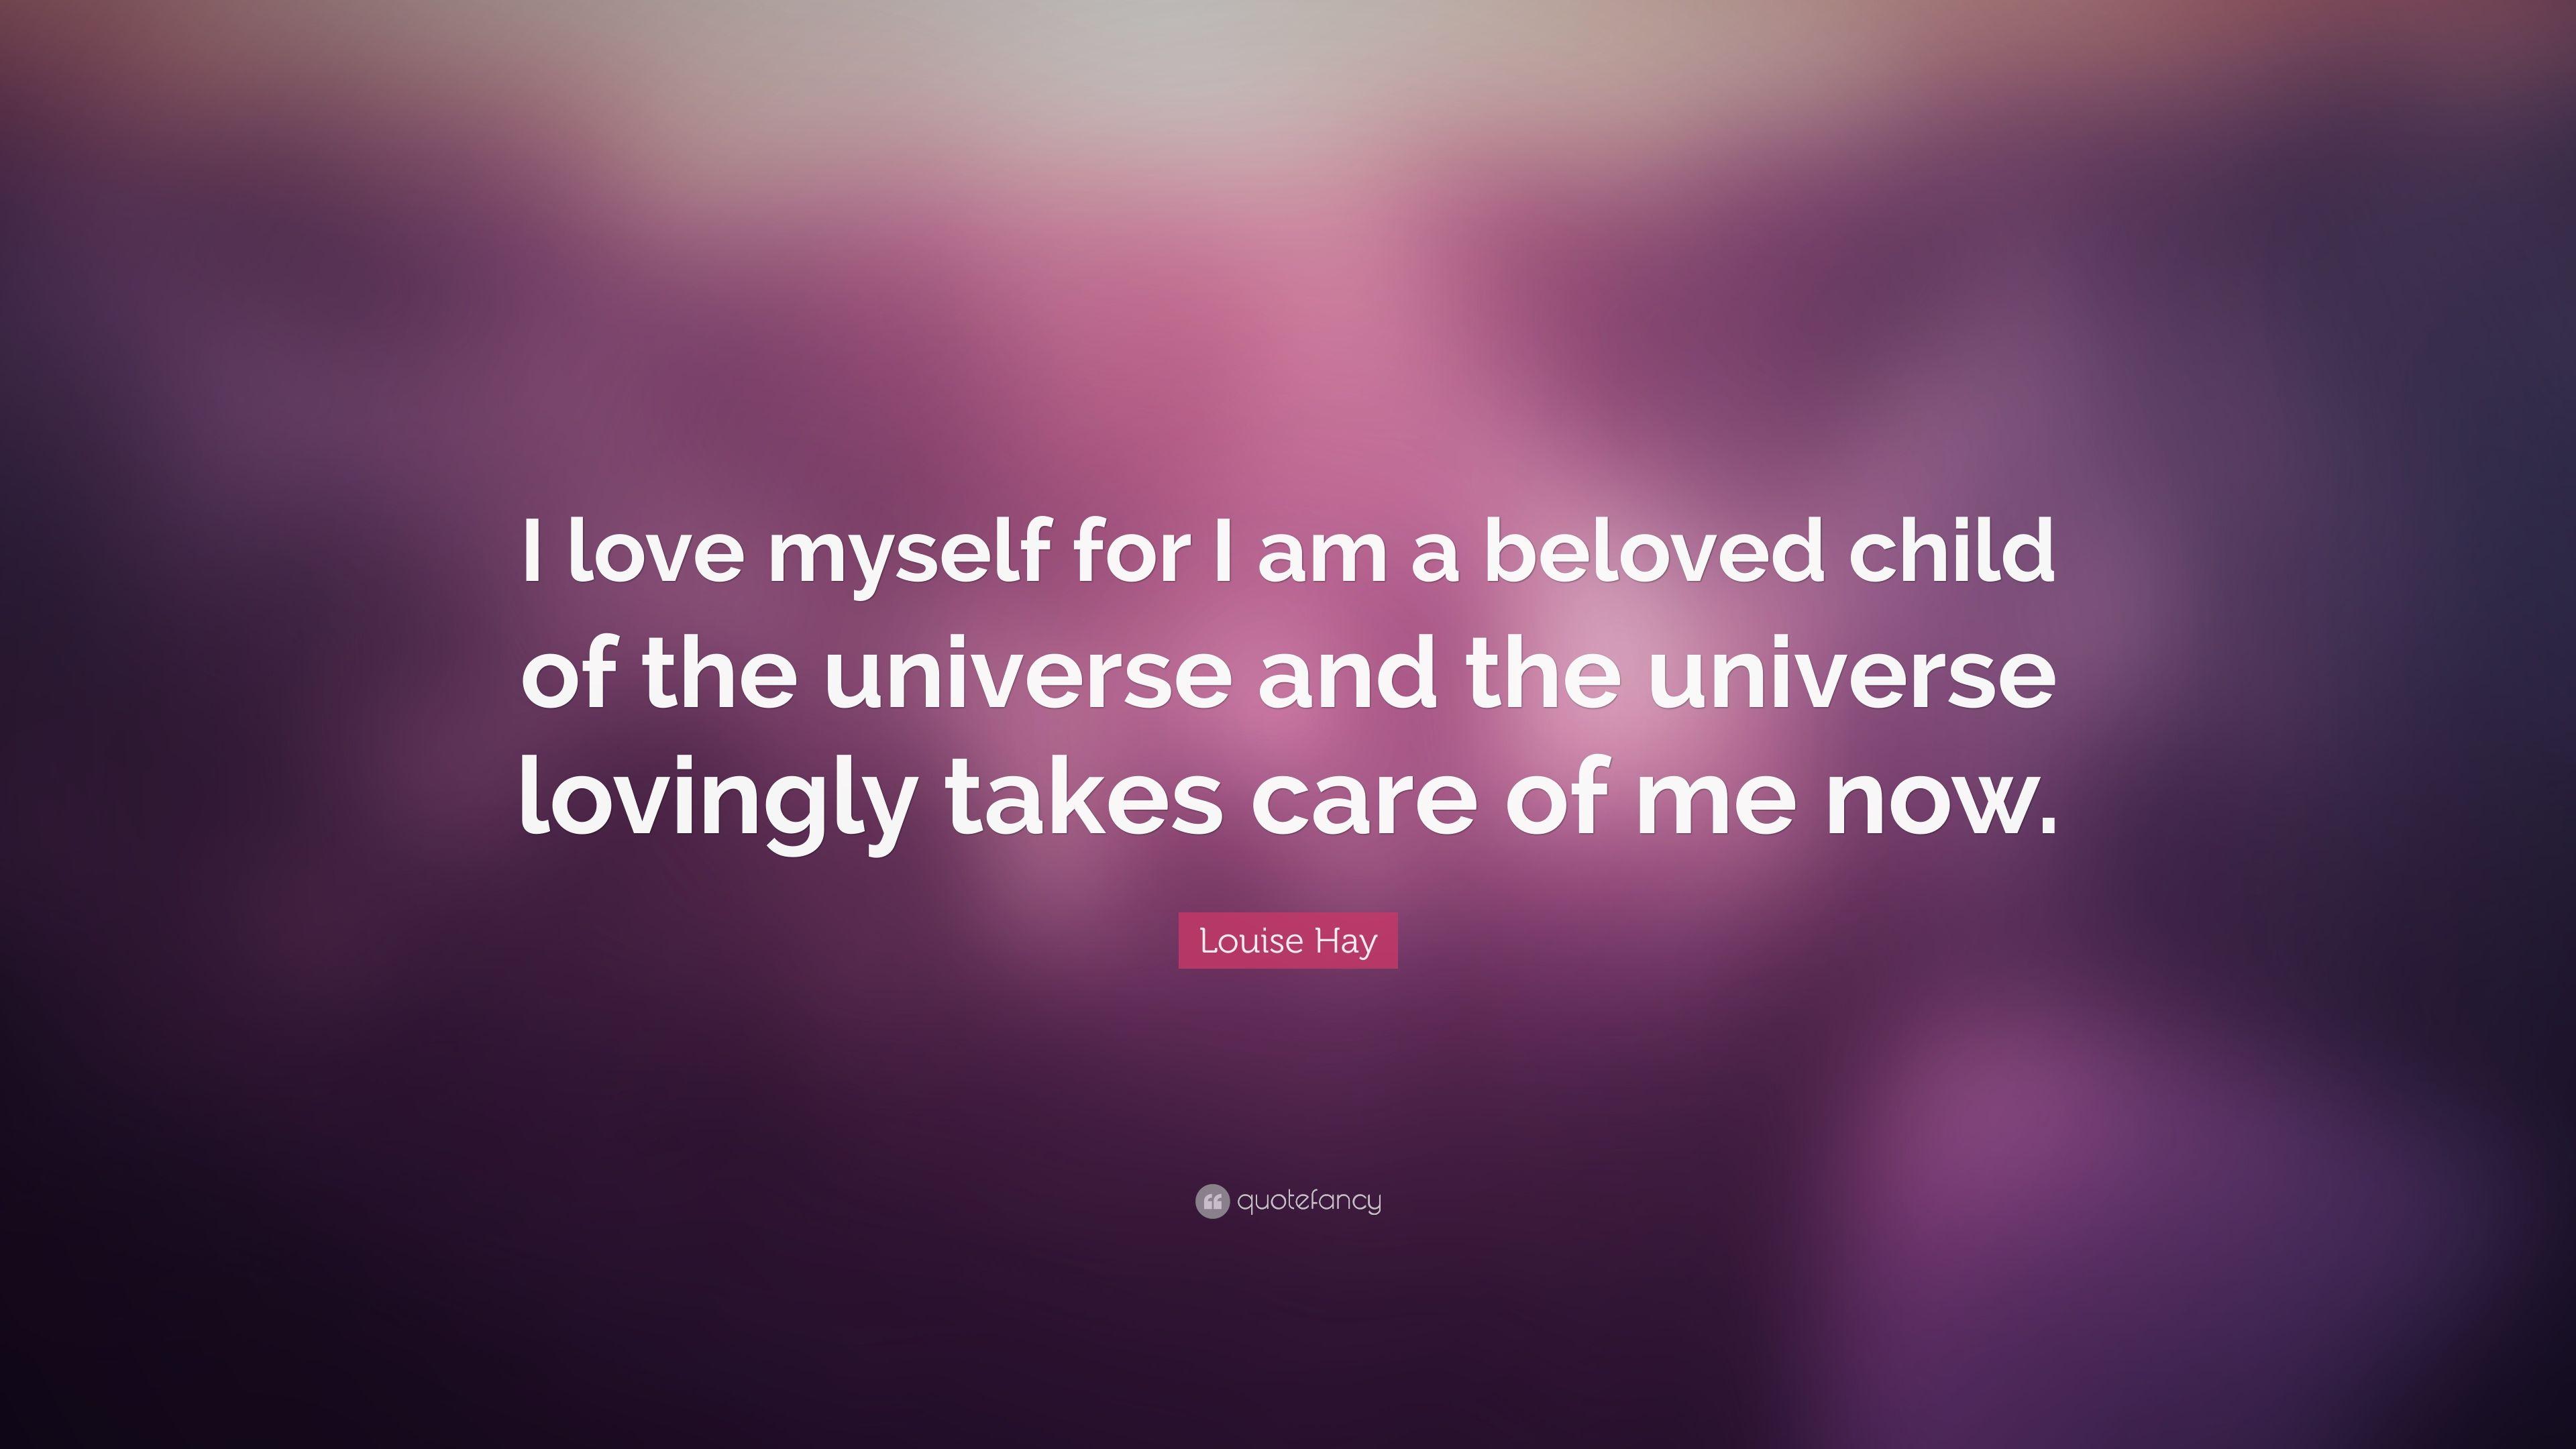 Louise Hay Quote: “I love myself for I am a beloved child of the universe and